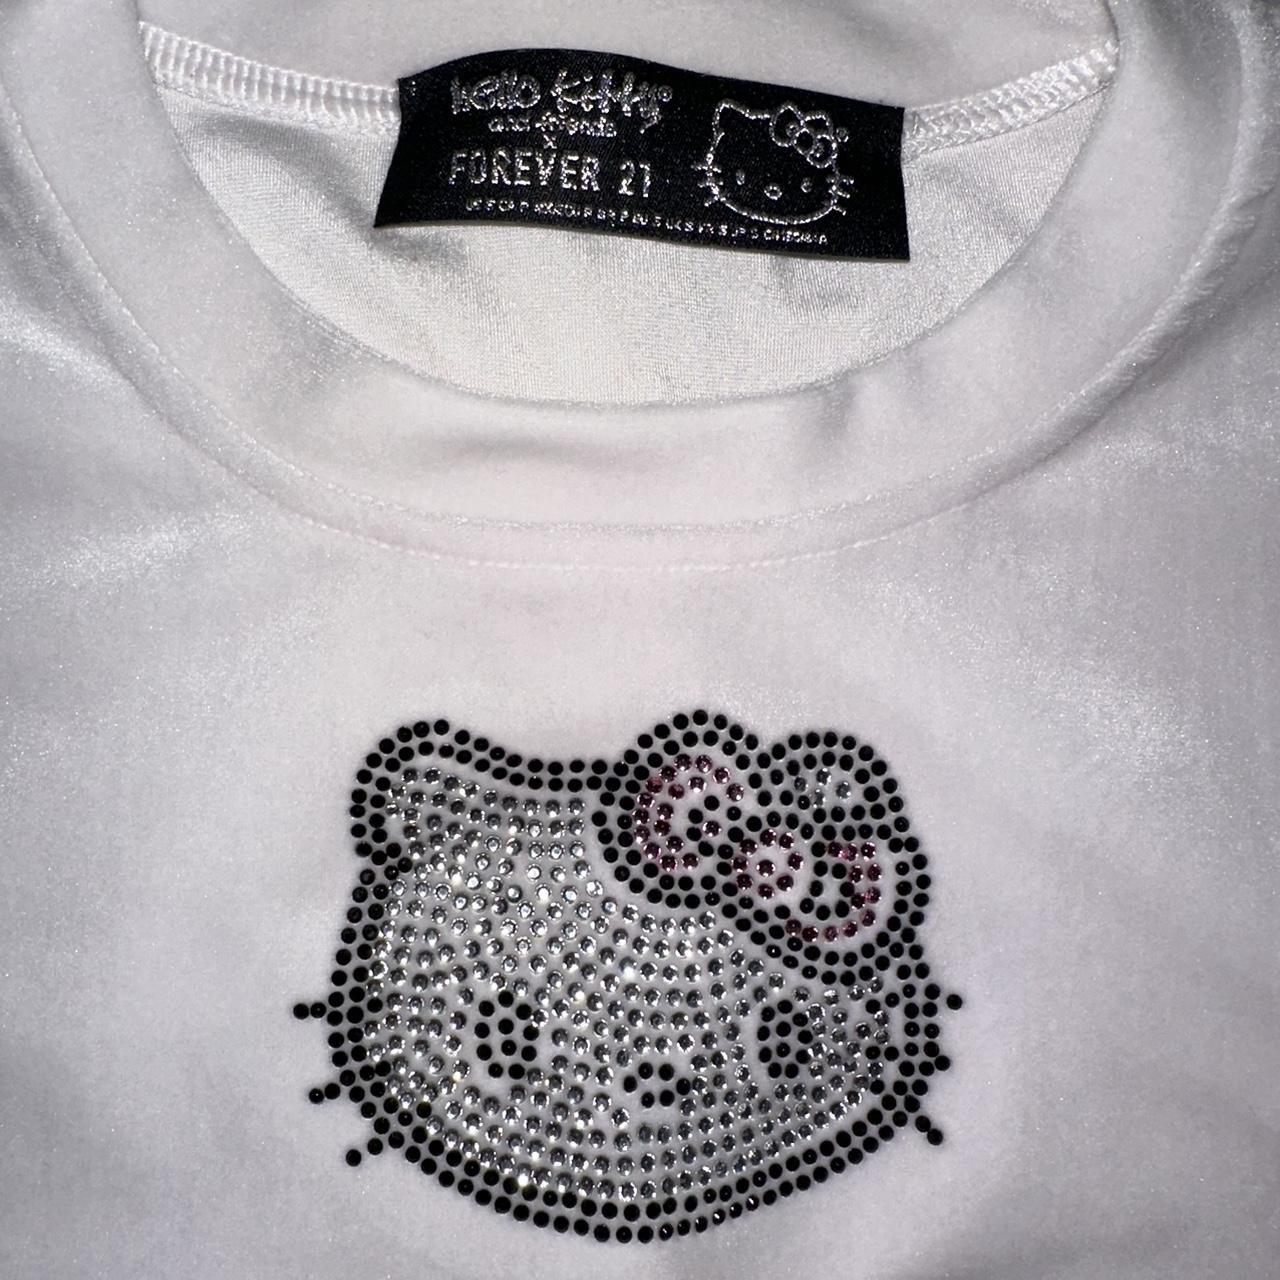 Embroidered Hello Kitty Hoodie | Forever 21